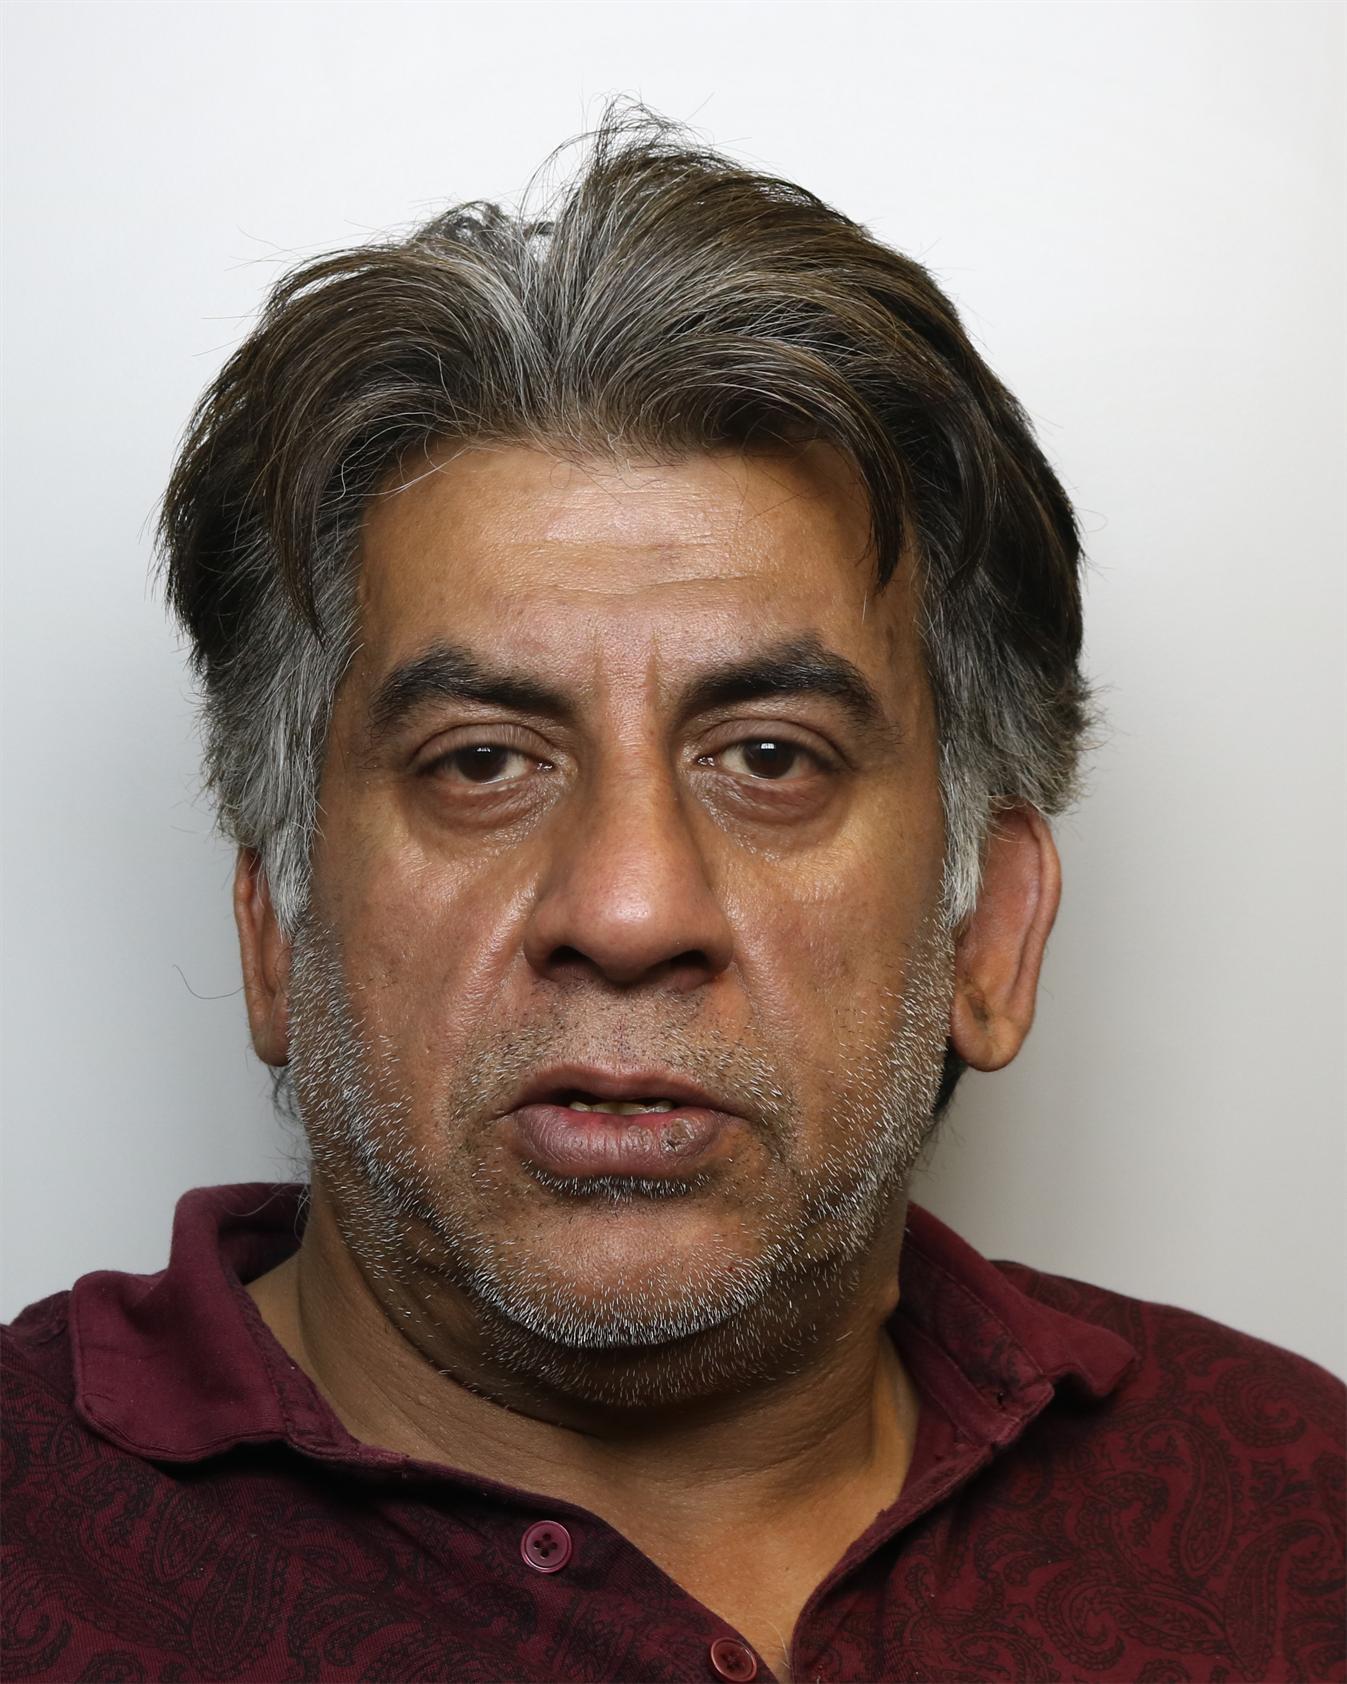 On Wednesday, Asgar Sheikh’s father, Khalid Sheikh (pictured), 55, was jailed for seven years and nine months